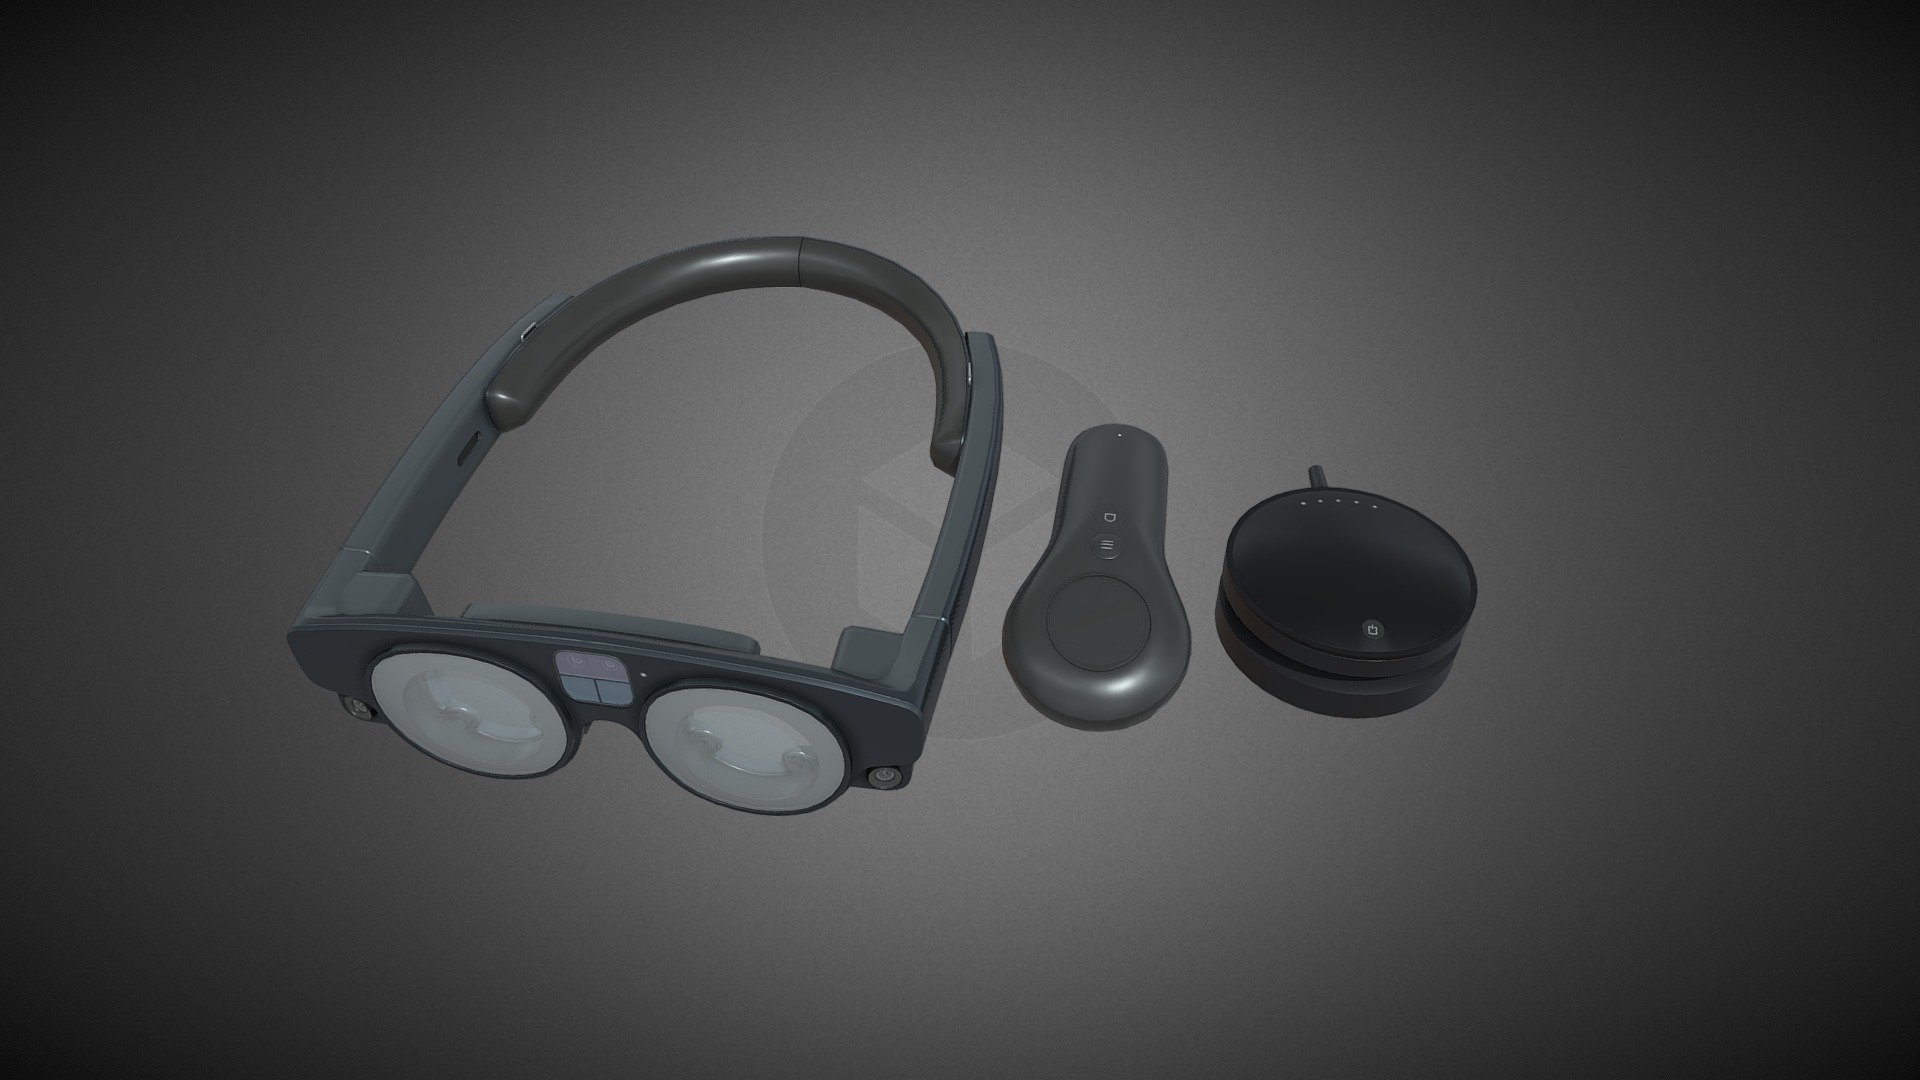 Magic Leap 2 contains low poly 3D models of VR Device with High Quality textures to fill up your game environment. The assets are VR-Ready and game ready.

Total Polygons - 13766

Total Tris - 27346

These models are delivered without any brandings or logos attached. The End users/Buyers are solely responsible for ensuring compliance with any branding or trademark requirements applicable to their specific projects.

For Unity3d (Built-in, URP, HDRP) Ready Assets visit our Unity Asset Store Page

Enjoy and please rate the asset!

Contact us on for AR/VR related queries and development support

Gmail - designer@devdensolutions.com

Website

Instagram

Facebook

Linkedin

Youtube

Buy Pizza - Magic Leap 2 - Buy Royalty Free 3D model by Devden 3d model